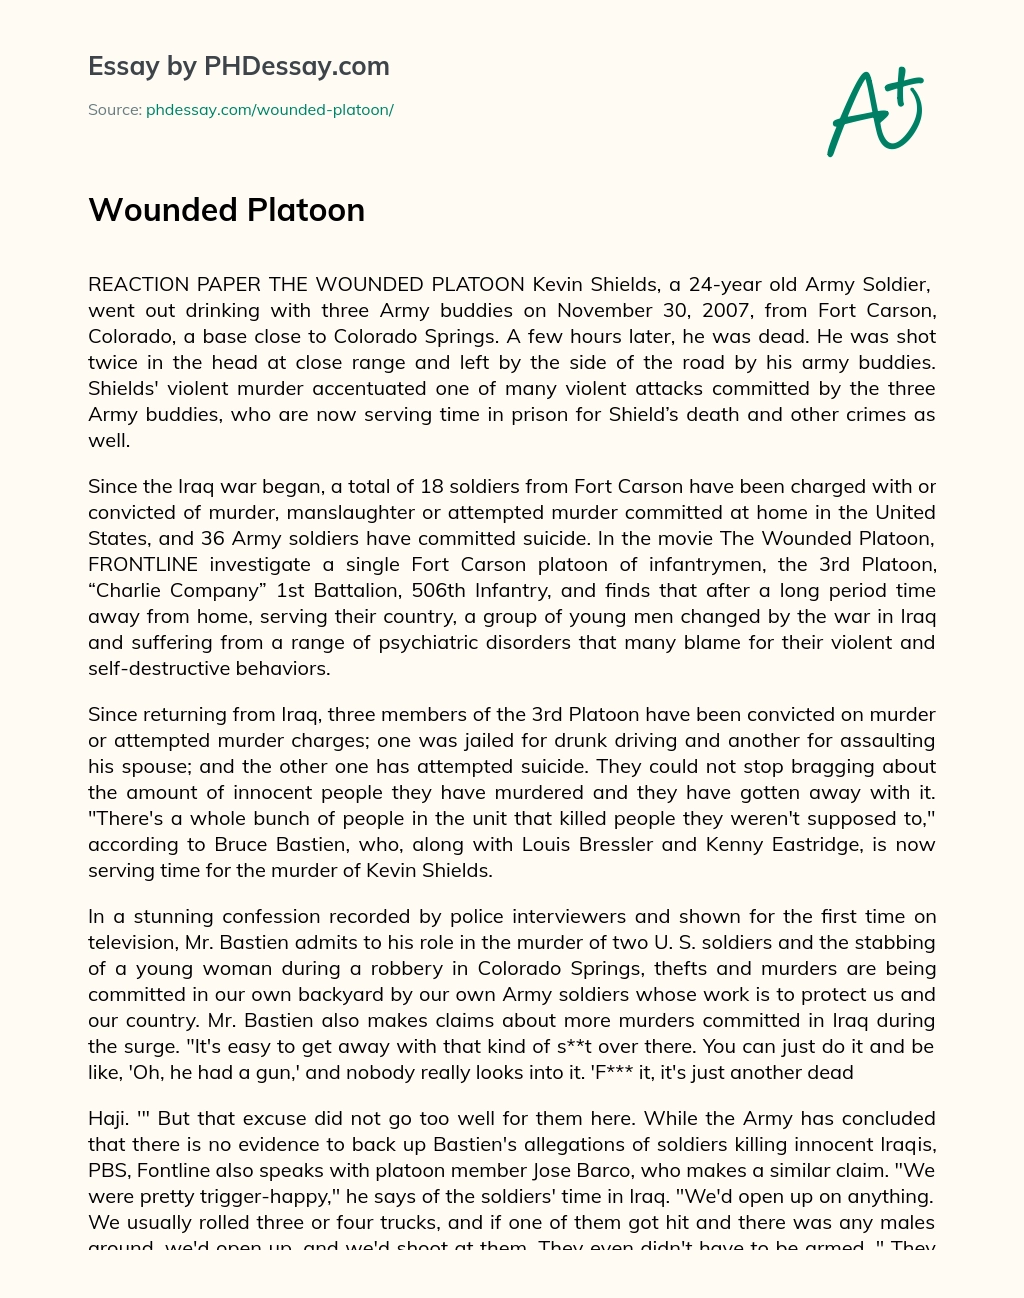 Wounded Platoon essay